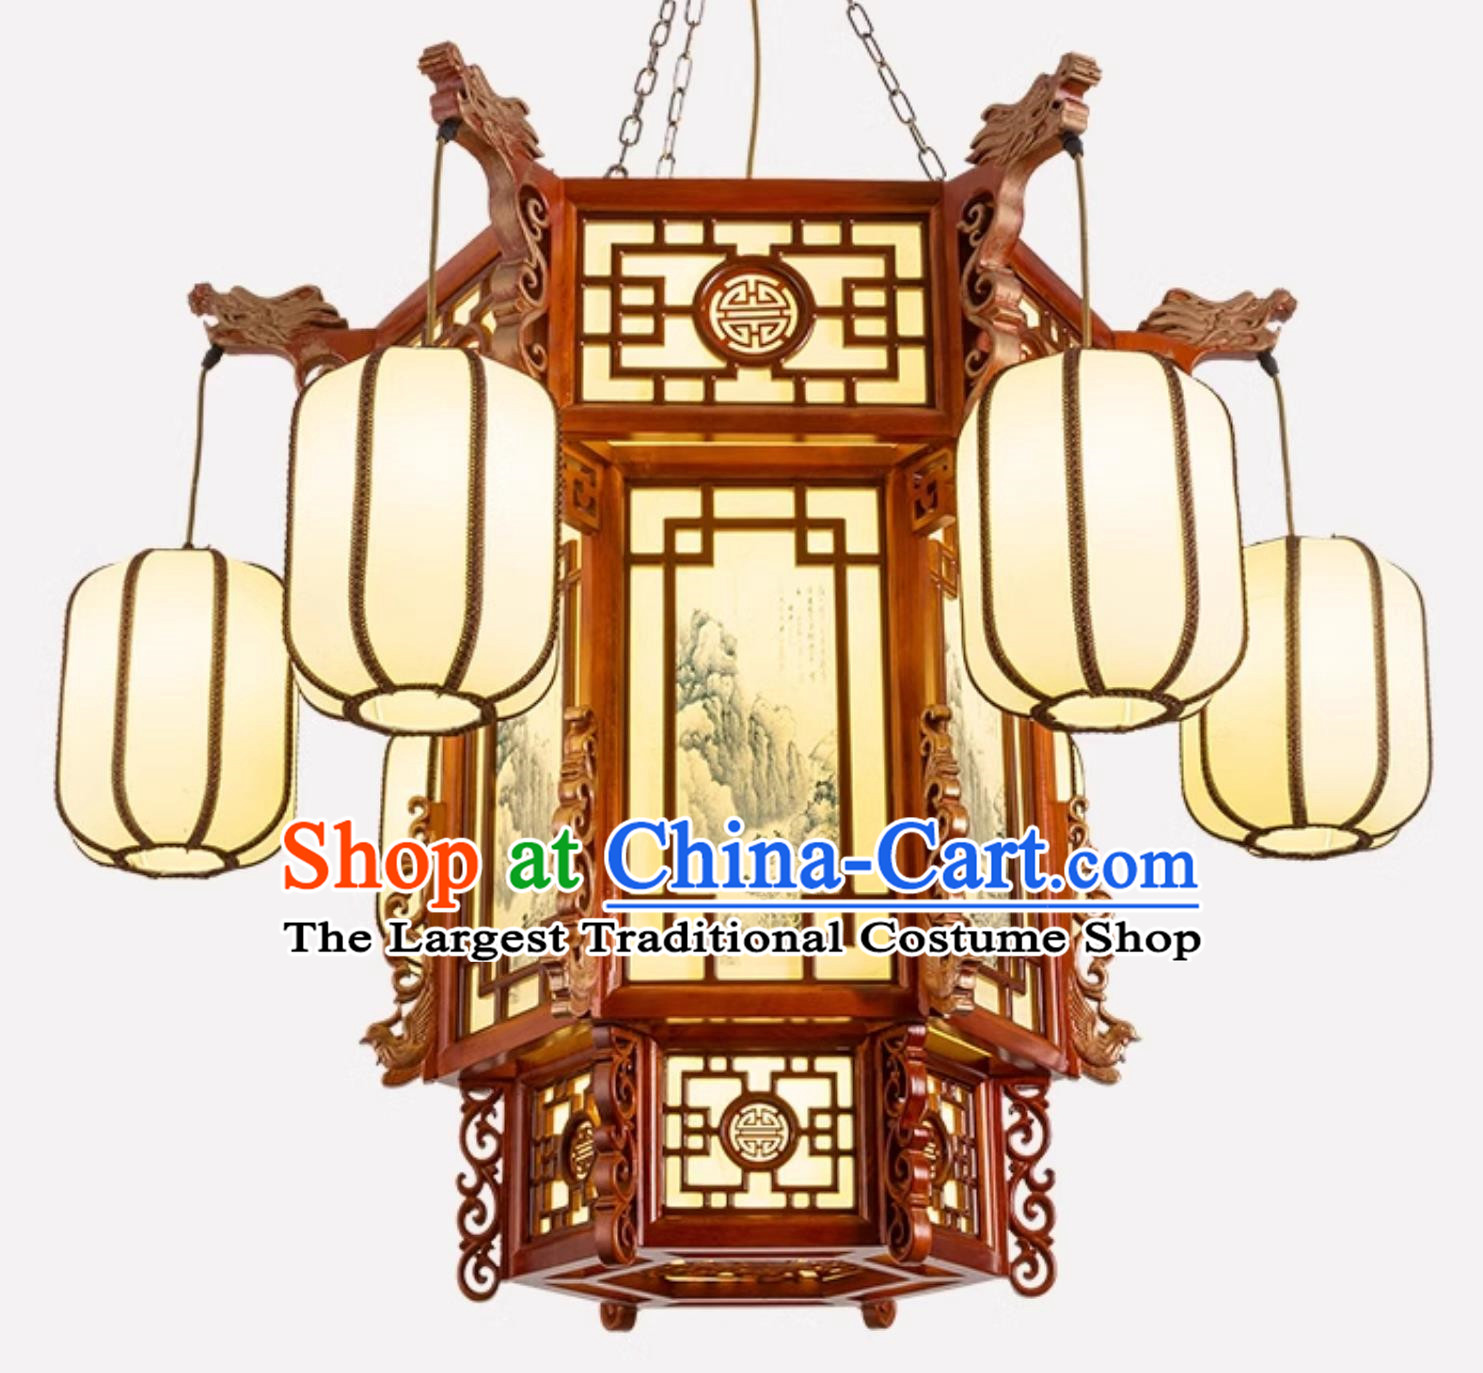 45 Inches Diameter Chinese Antique Large Chandelier Solid Wood Hexagonal Faucet Phoenix Tail Palace Lantern Ancient Building Hotel Chandelier